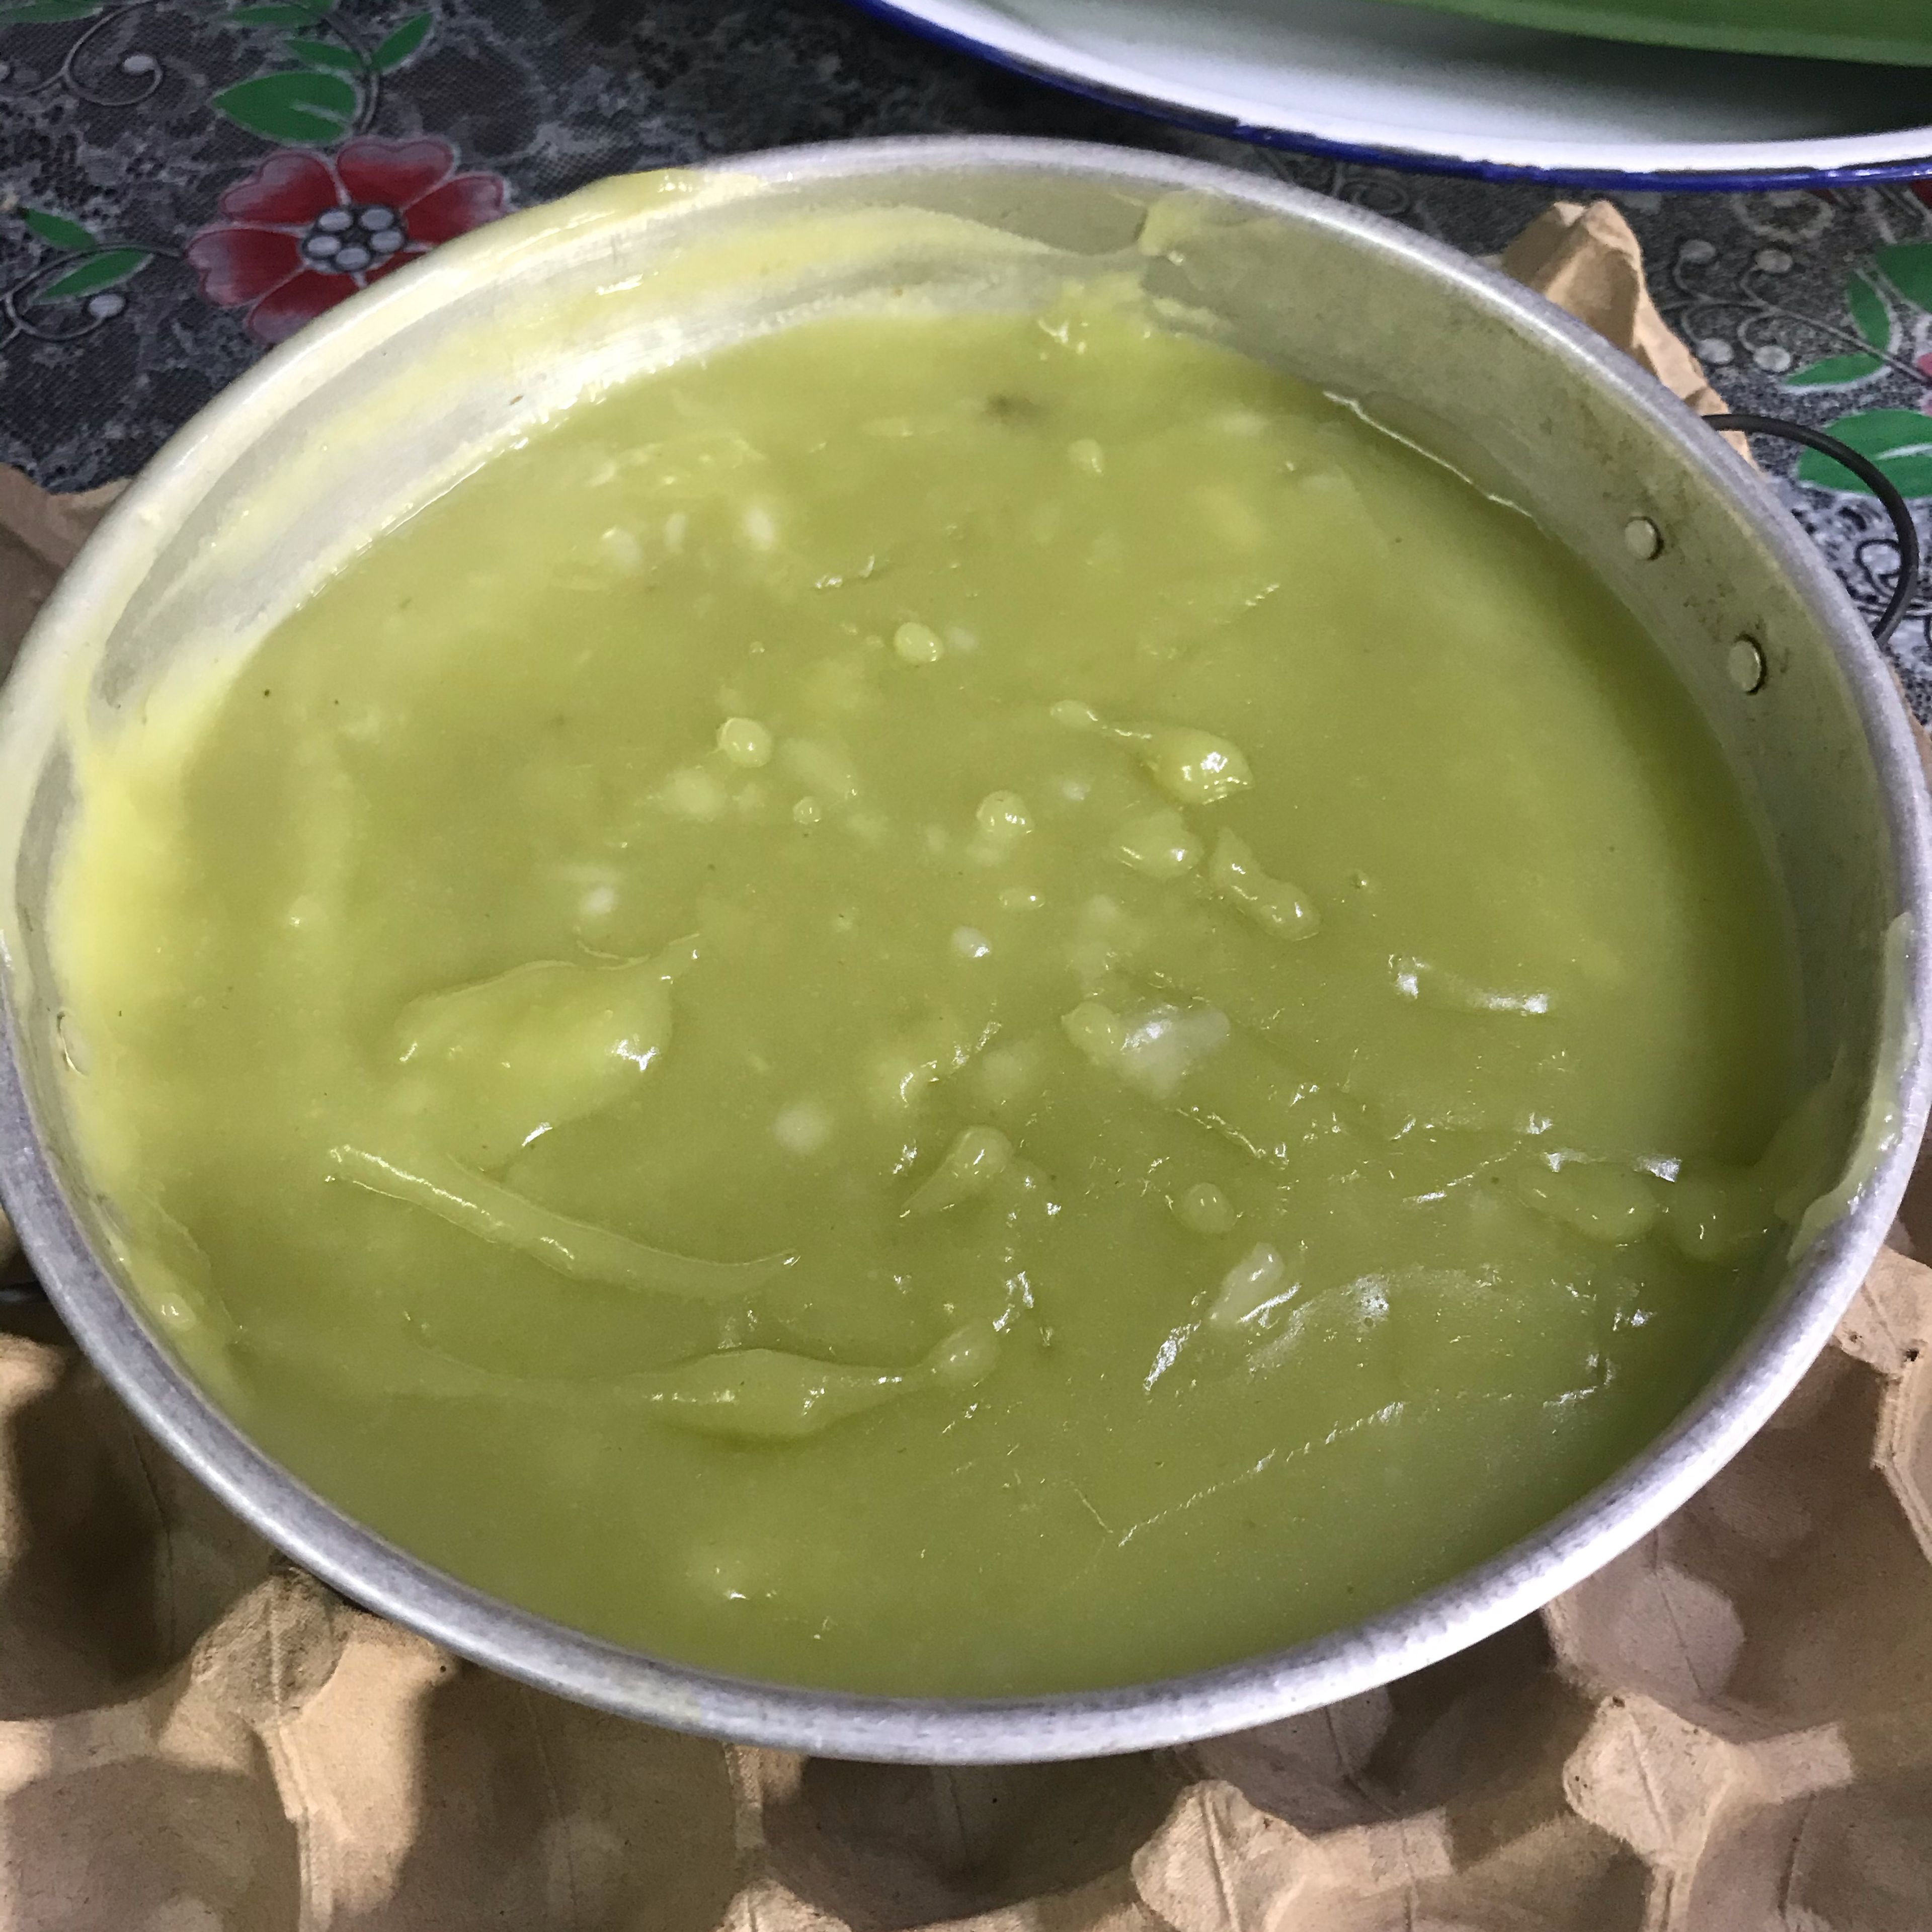 pour the pandan leaves water, sugar and flour on the wok and heat it up while stirring it until it becomes soupy. (make sure you don’t heat it too much) once done, pour the mixture into a cake pan